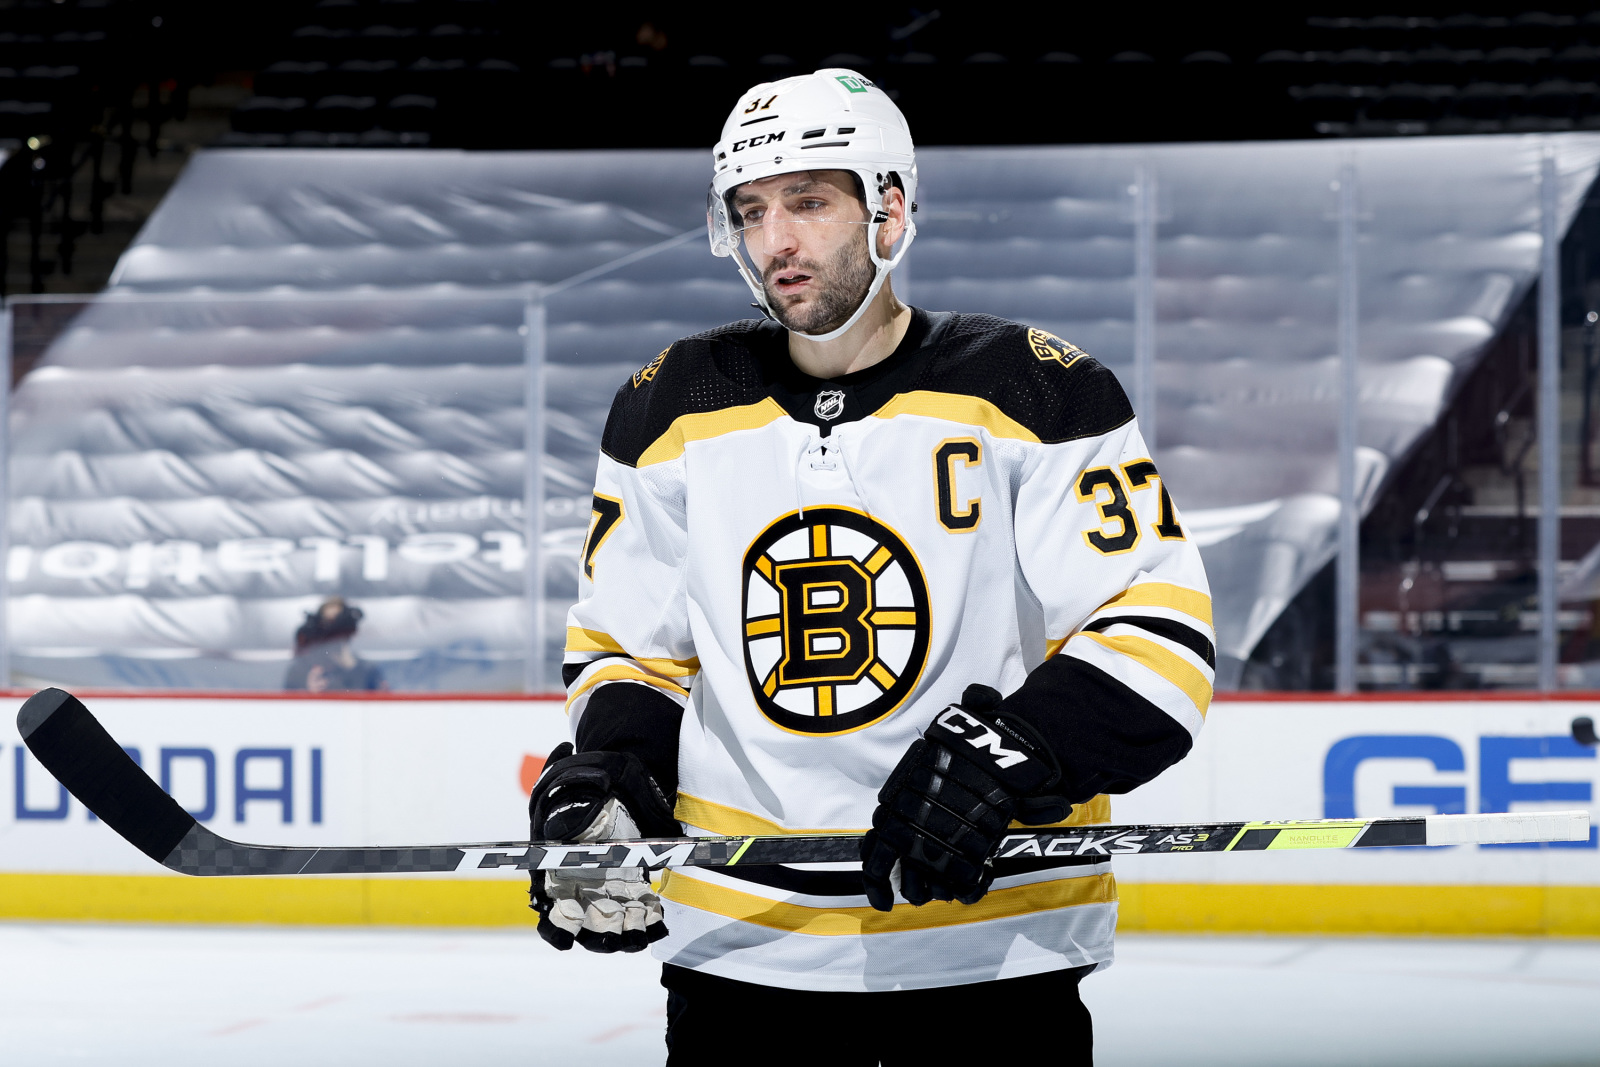 Patrice Bergeron may get freed up on offense - The Boston Globe